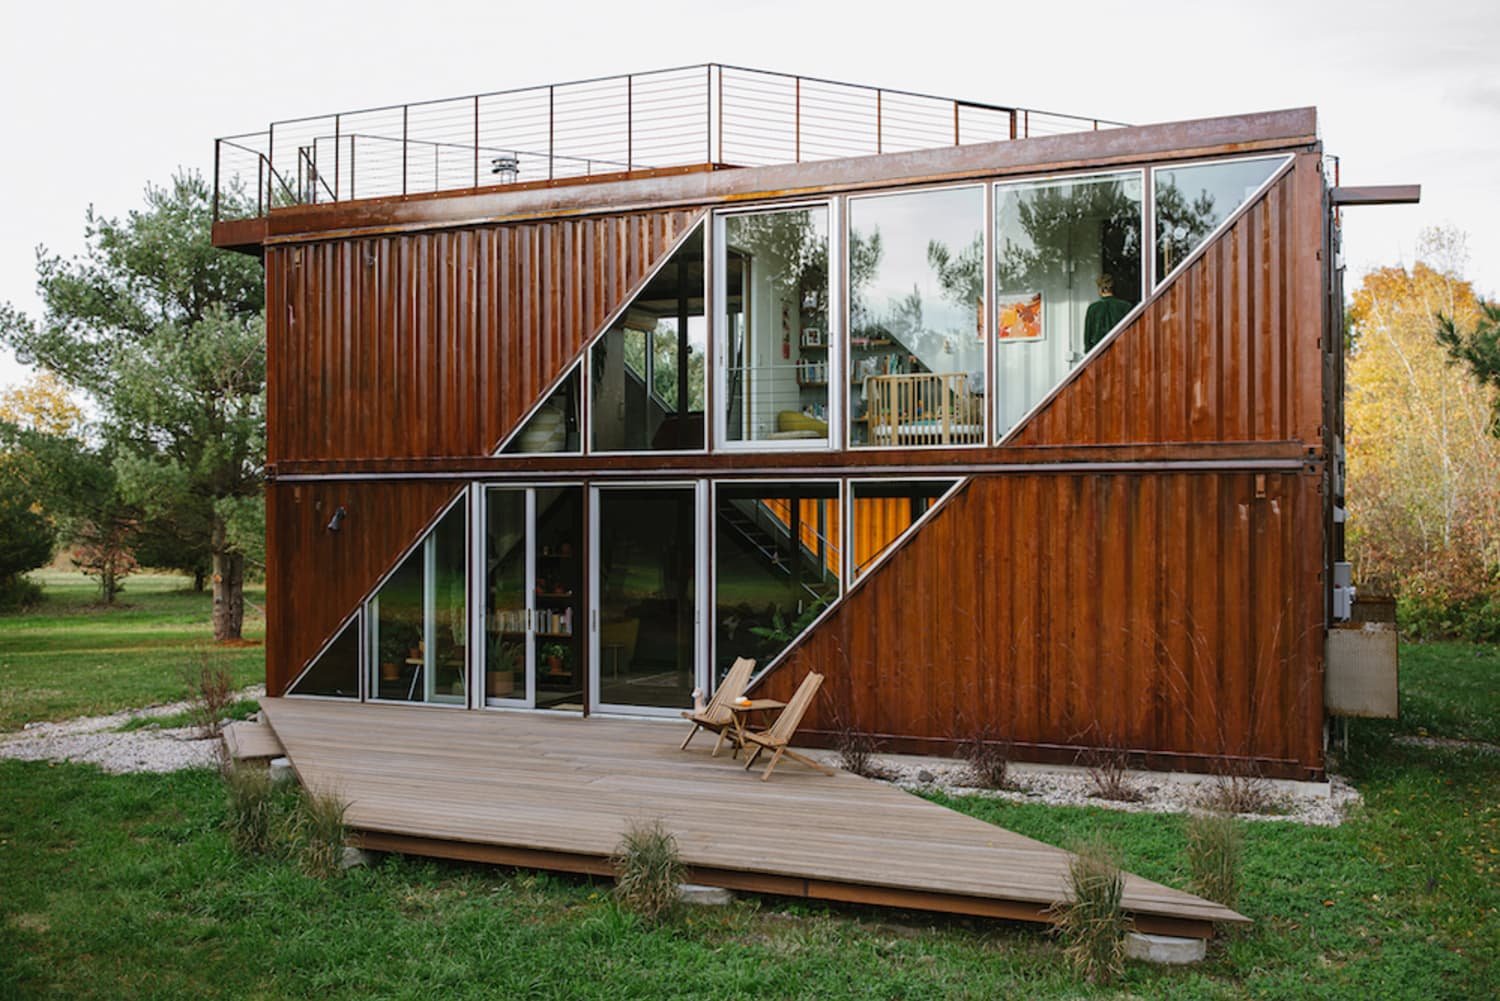 Inside a Whimsical Two-Story Home Built From Shipping Containers